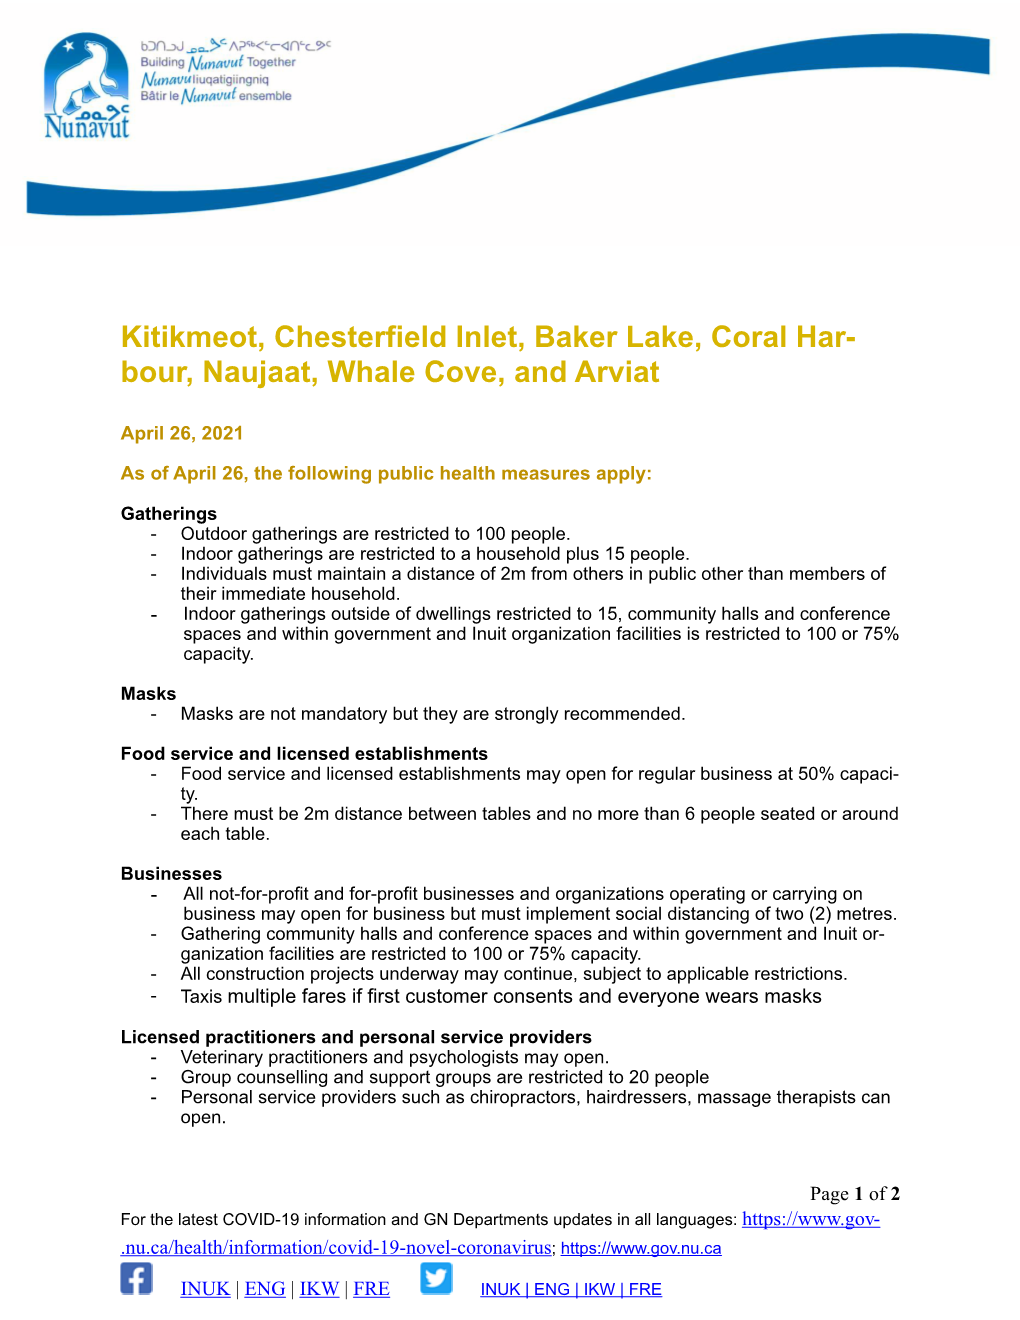 Public Health Measures for Kitikmeot, Chesterfield Inlet, Baker Lake, Coral Harbour, Naujaat, Whale Cove Arviat April 26 Eng